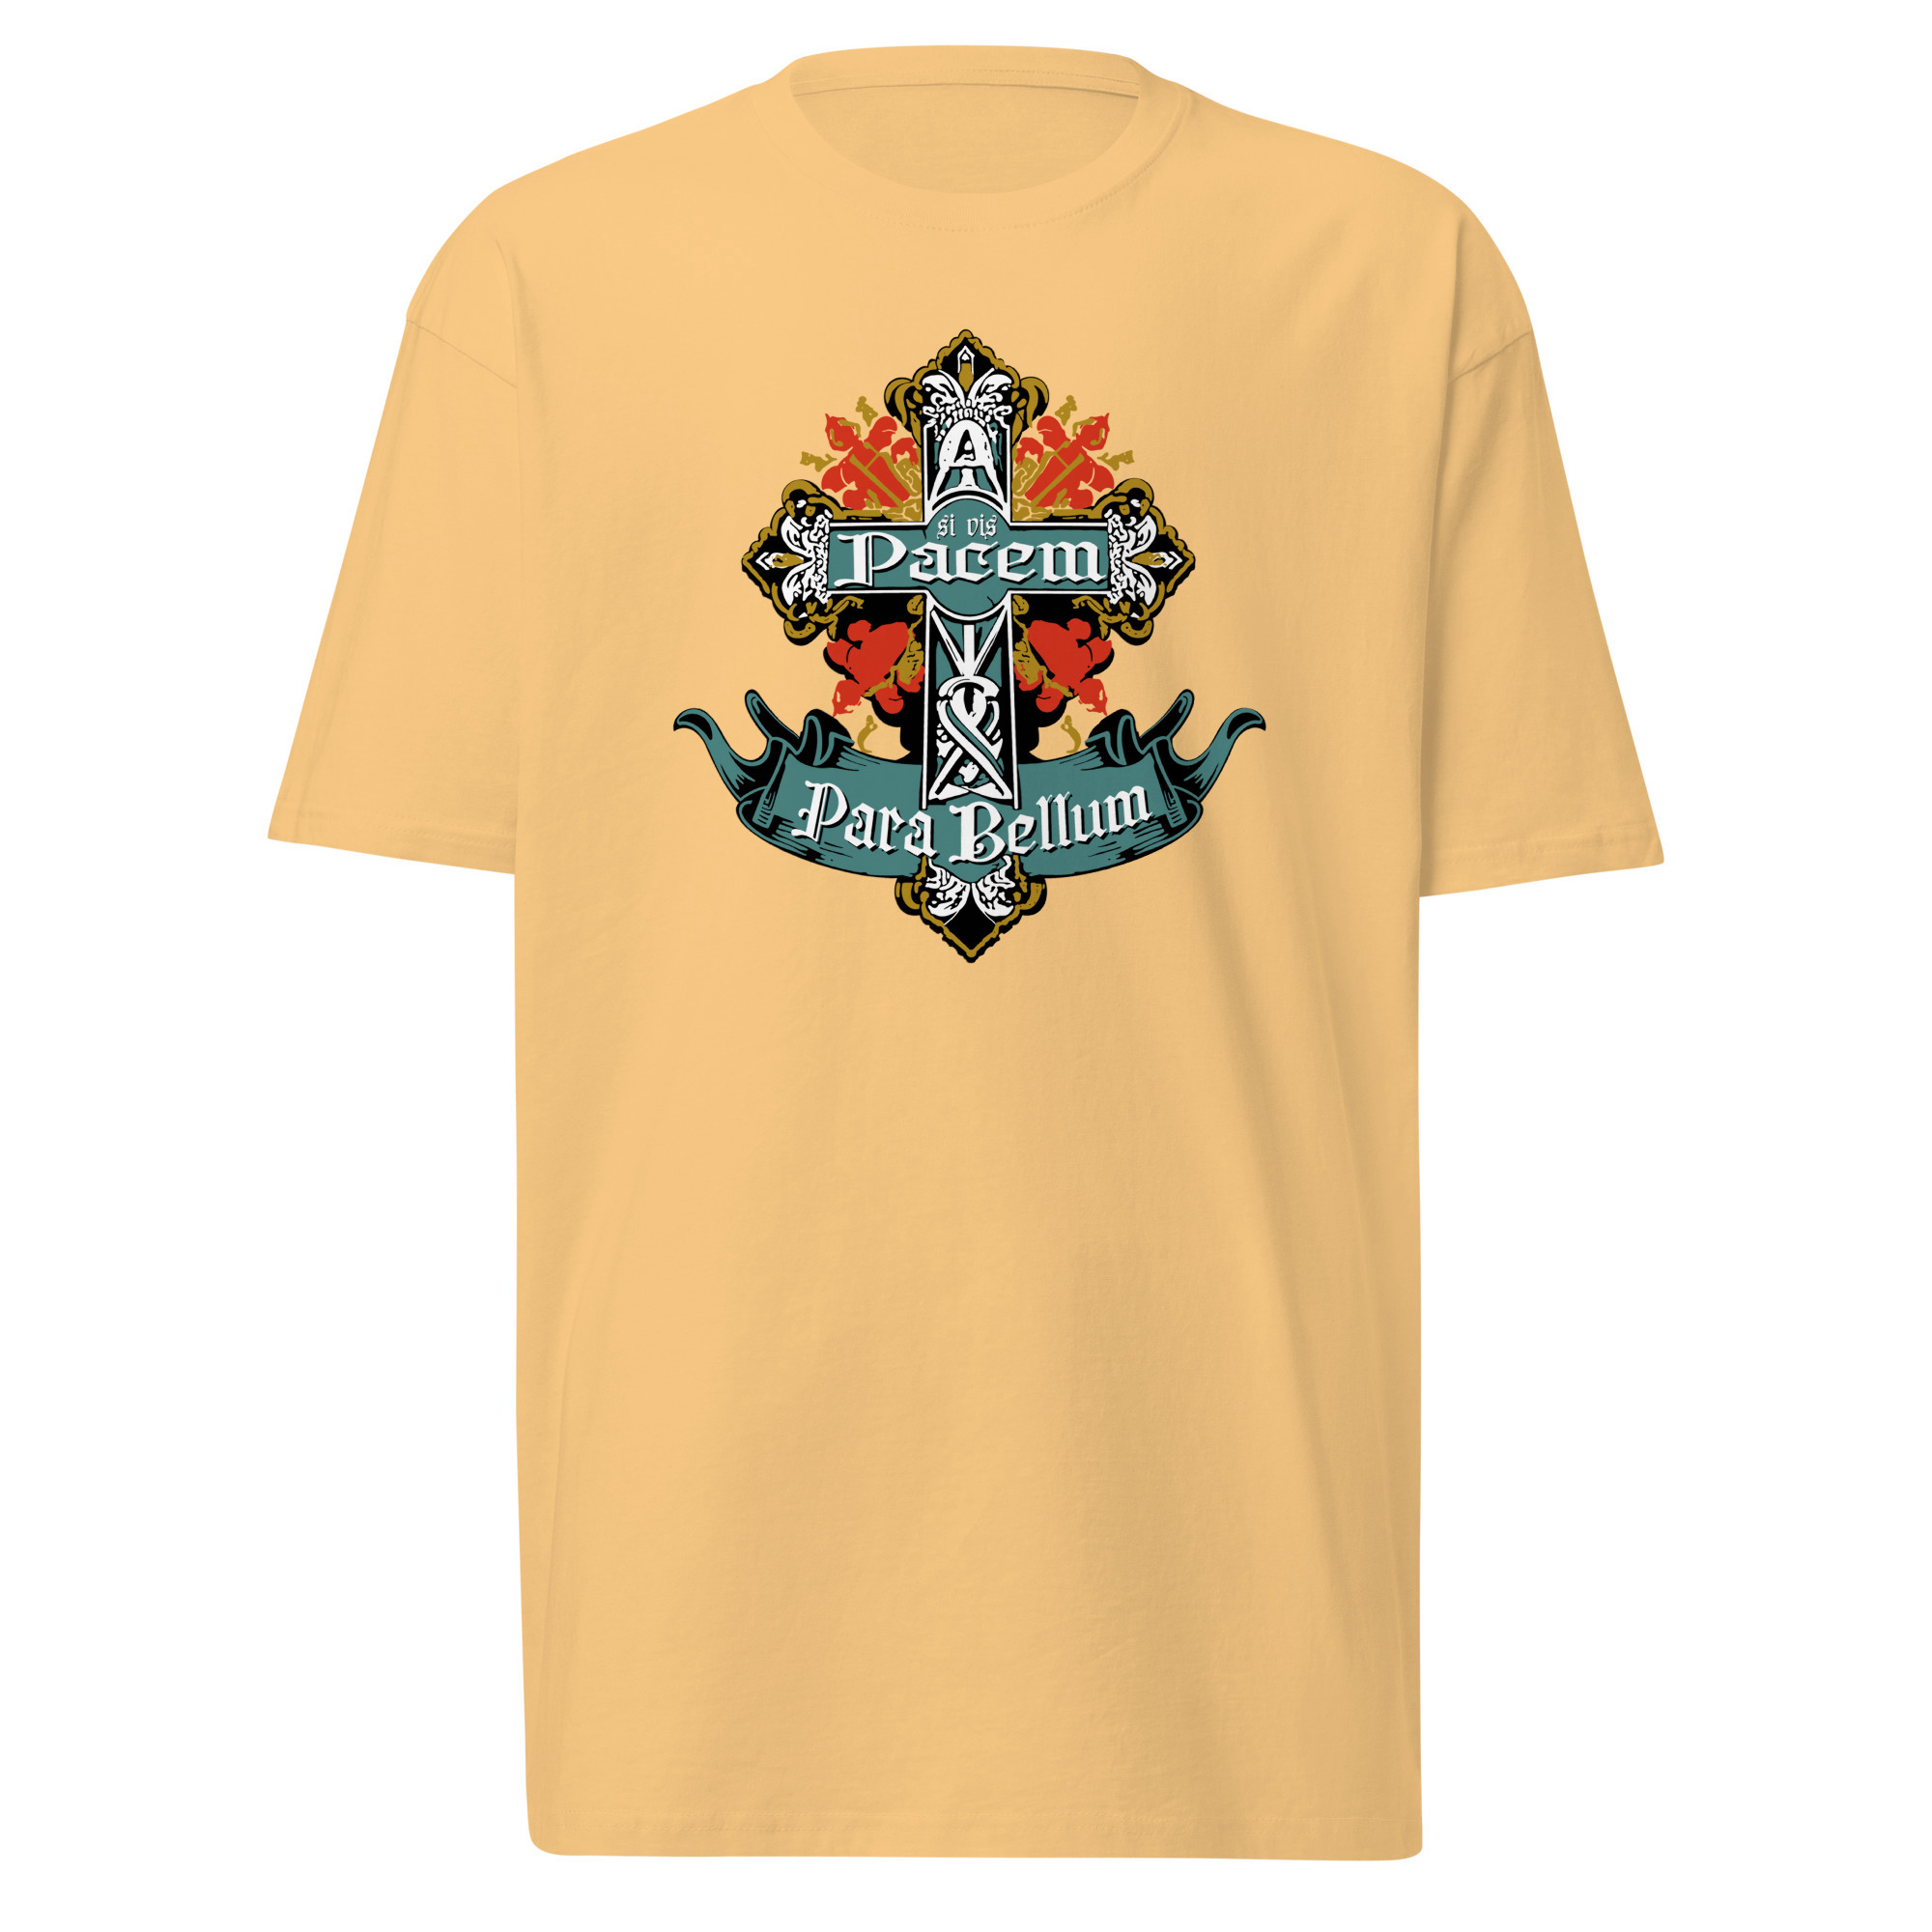 If You Want Peace, Prepare For War T-Shirt - Vintage Gold / XL